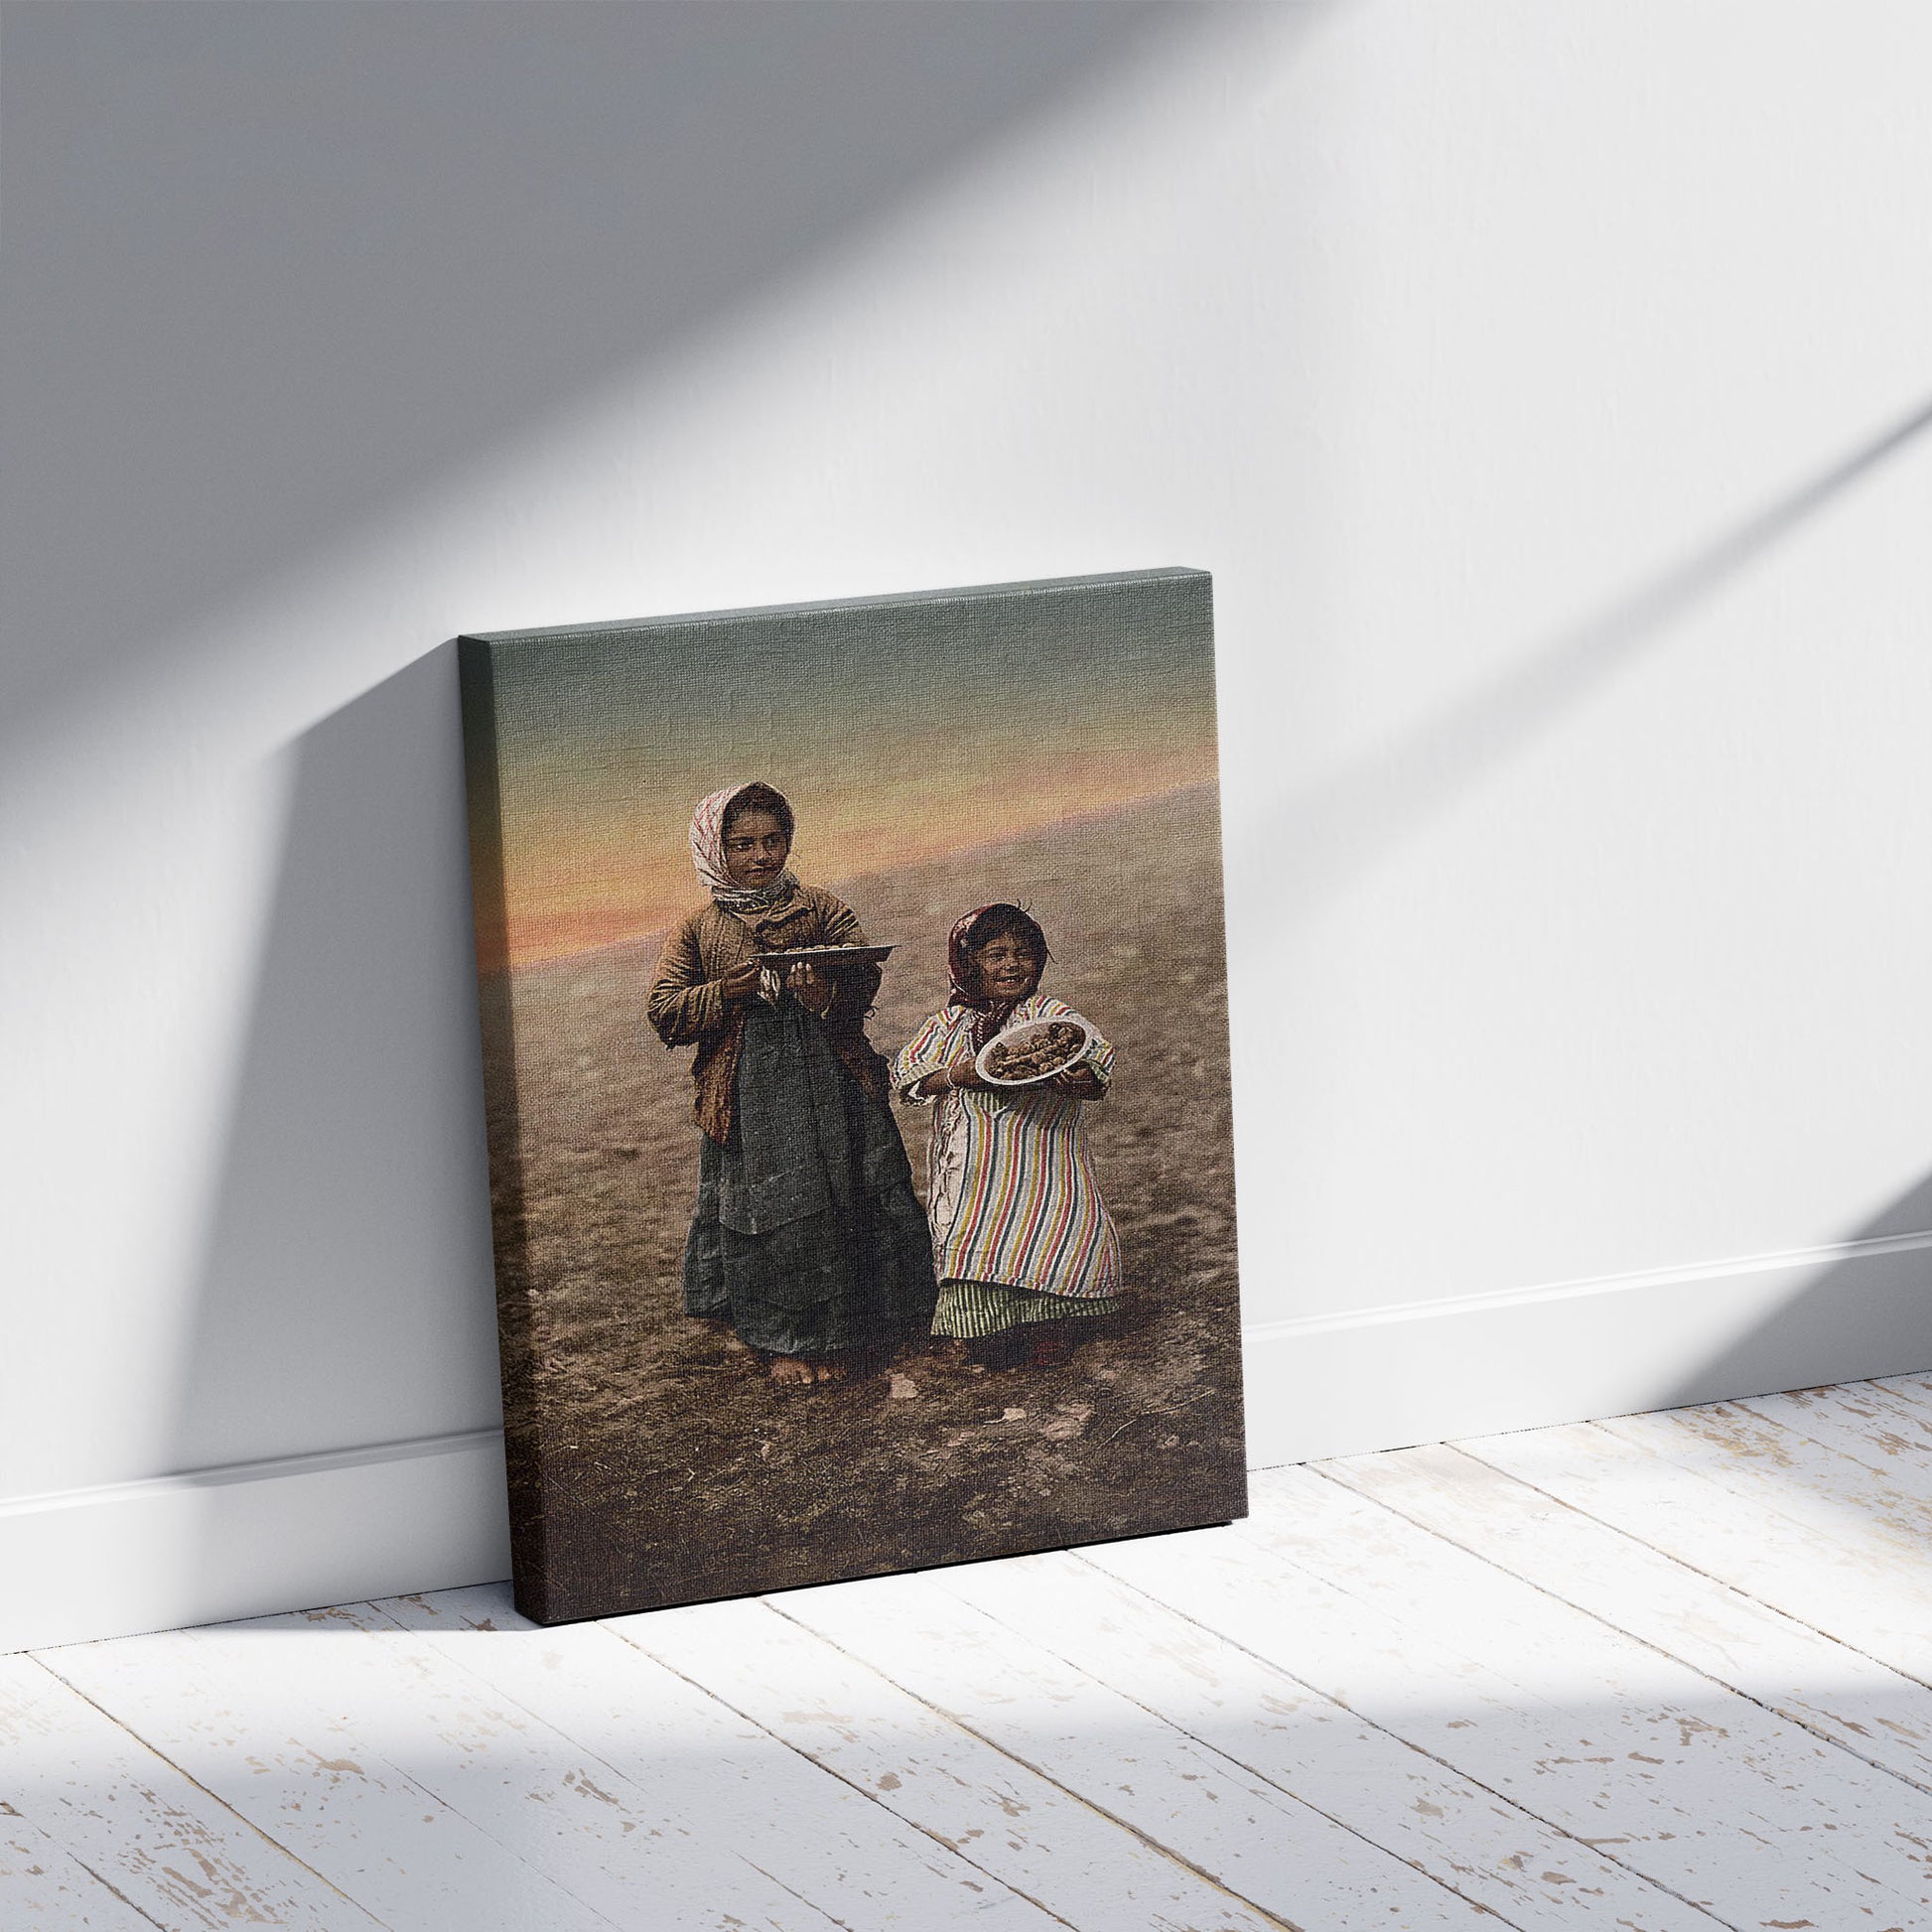 A picture of Native children from neighborhood of Jerusalem, Holy Land, a mockup of the print leaning against a wall